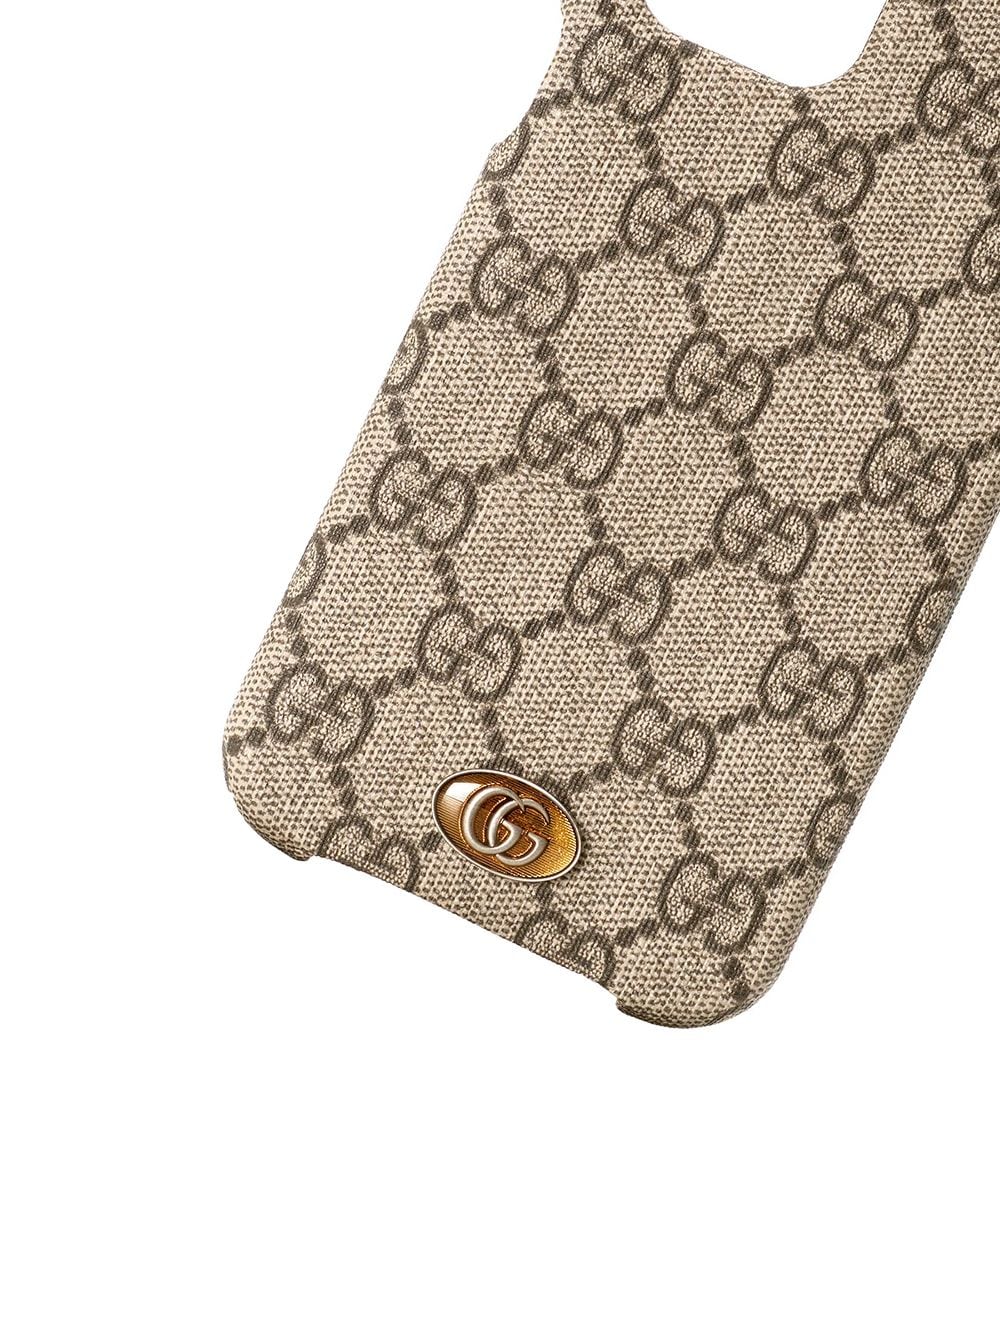 Gucci Ophidia case for iPhone 11 Pro Max - ShopStyle Tech Accessories